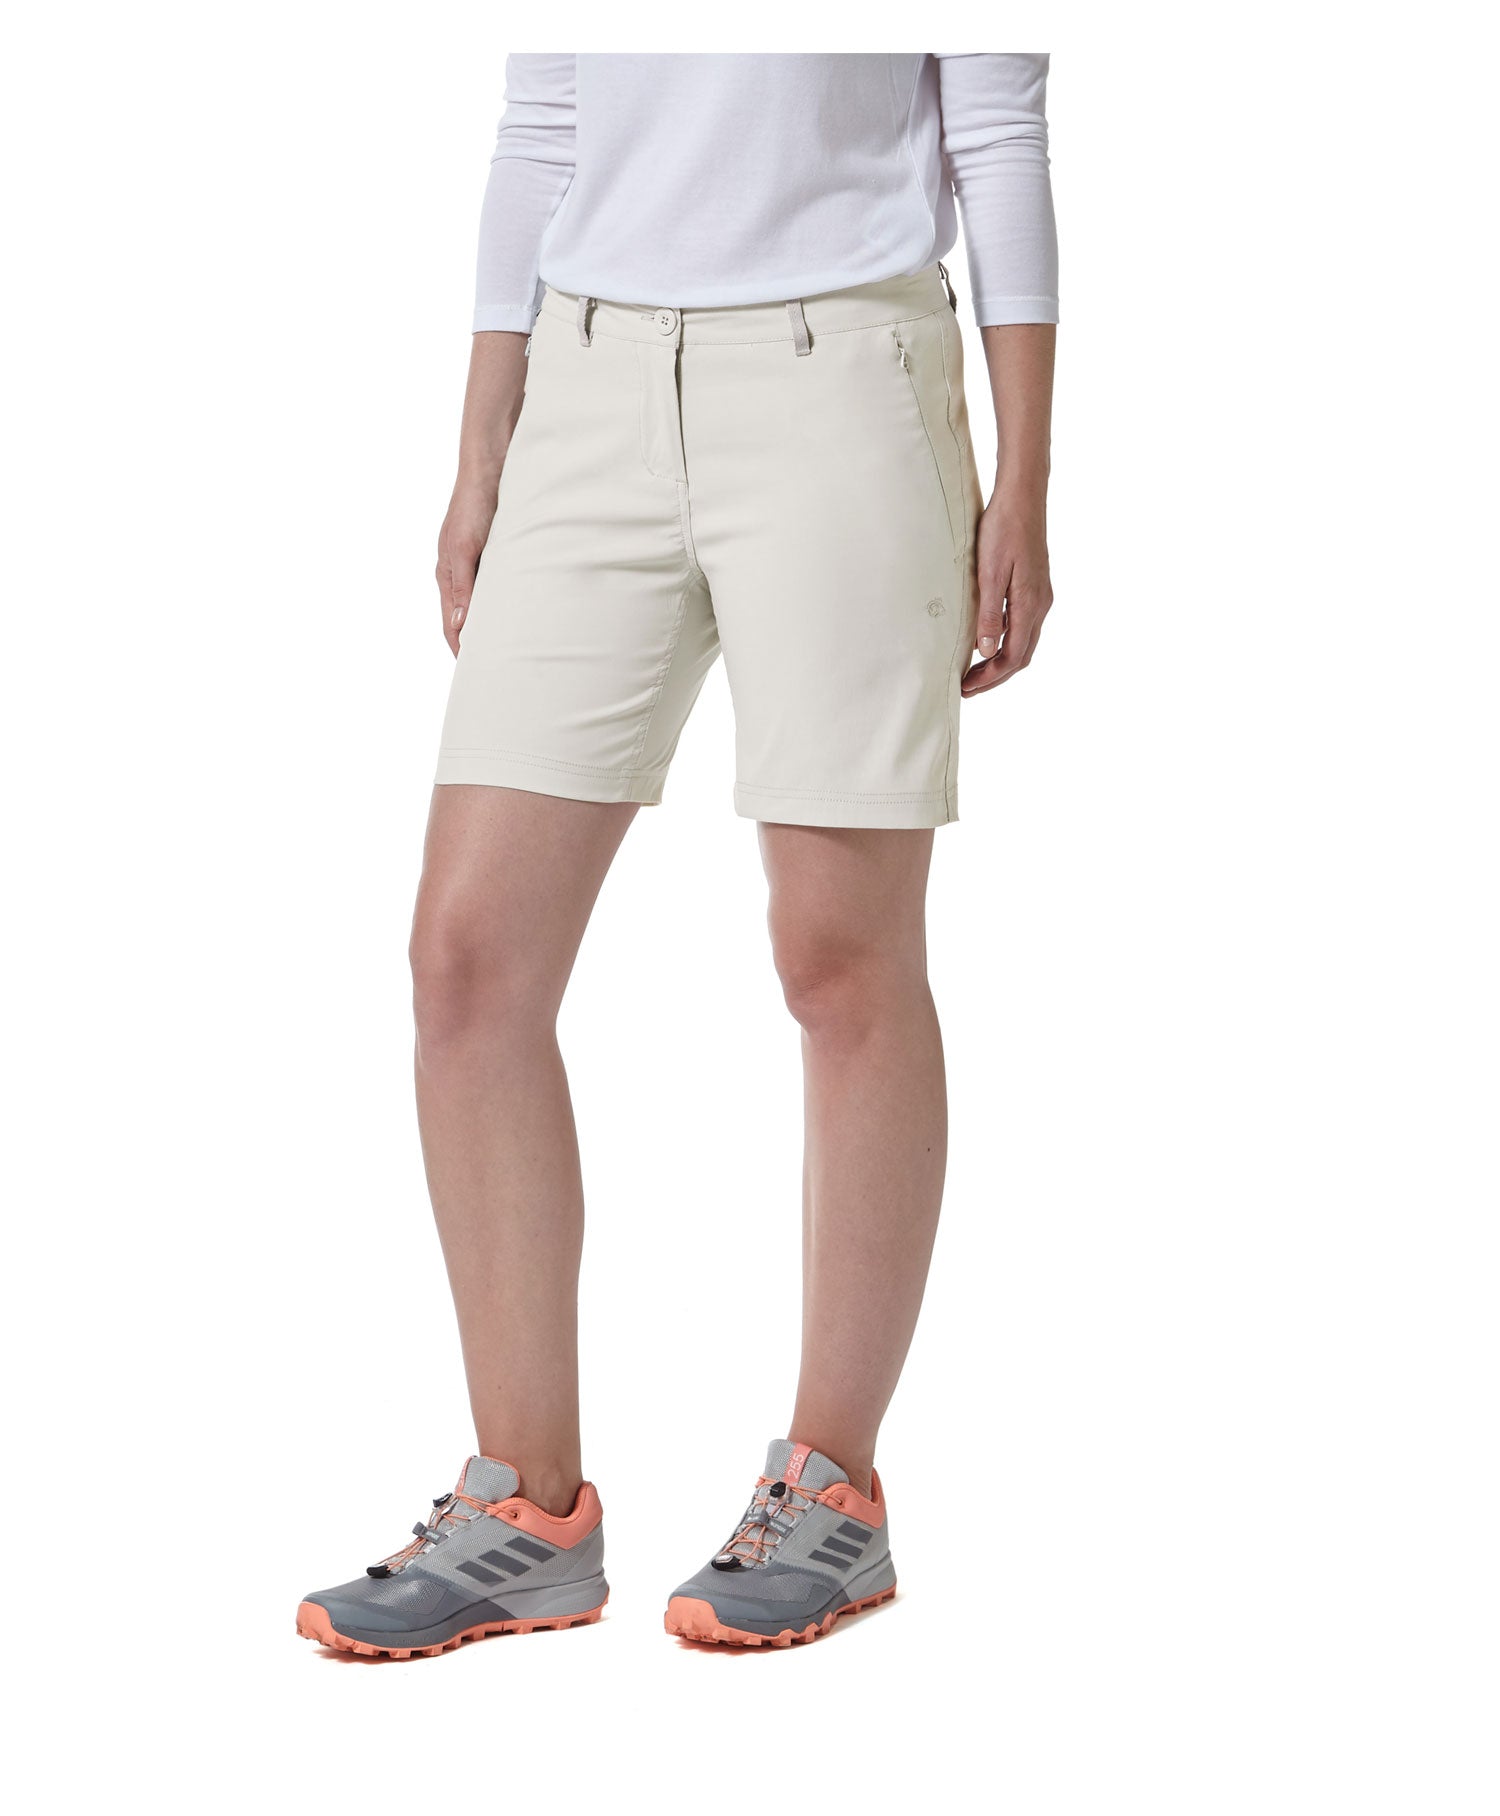 dove grey Ladies Kiwi Pro III Shorts by Craghoppers